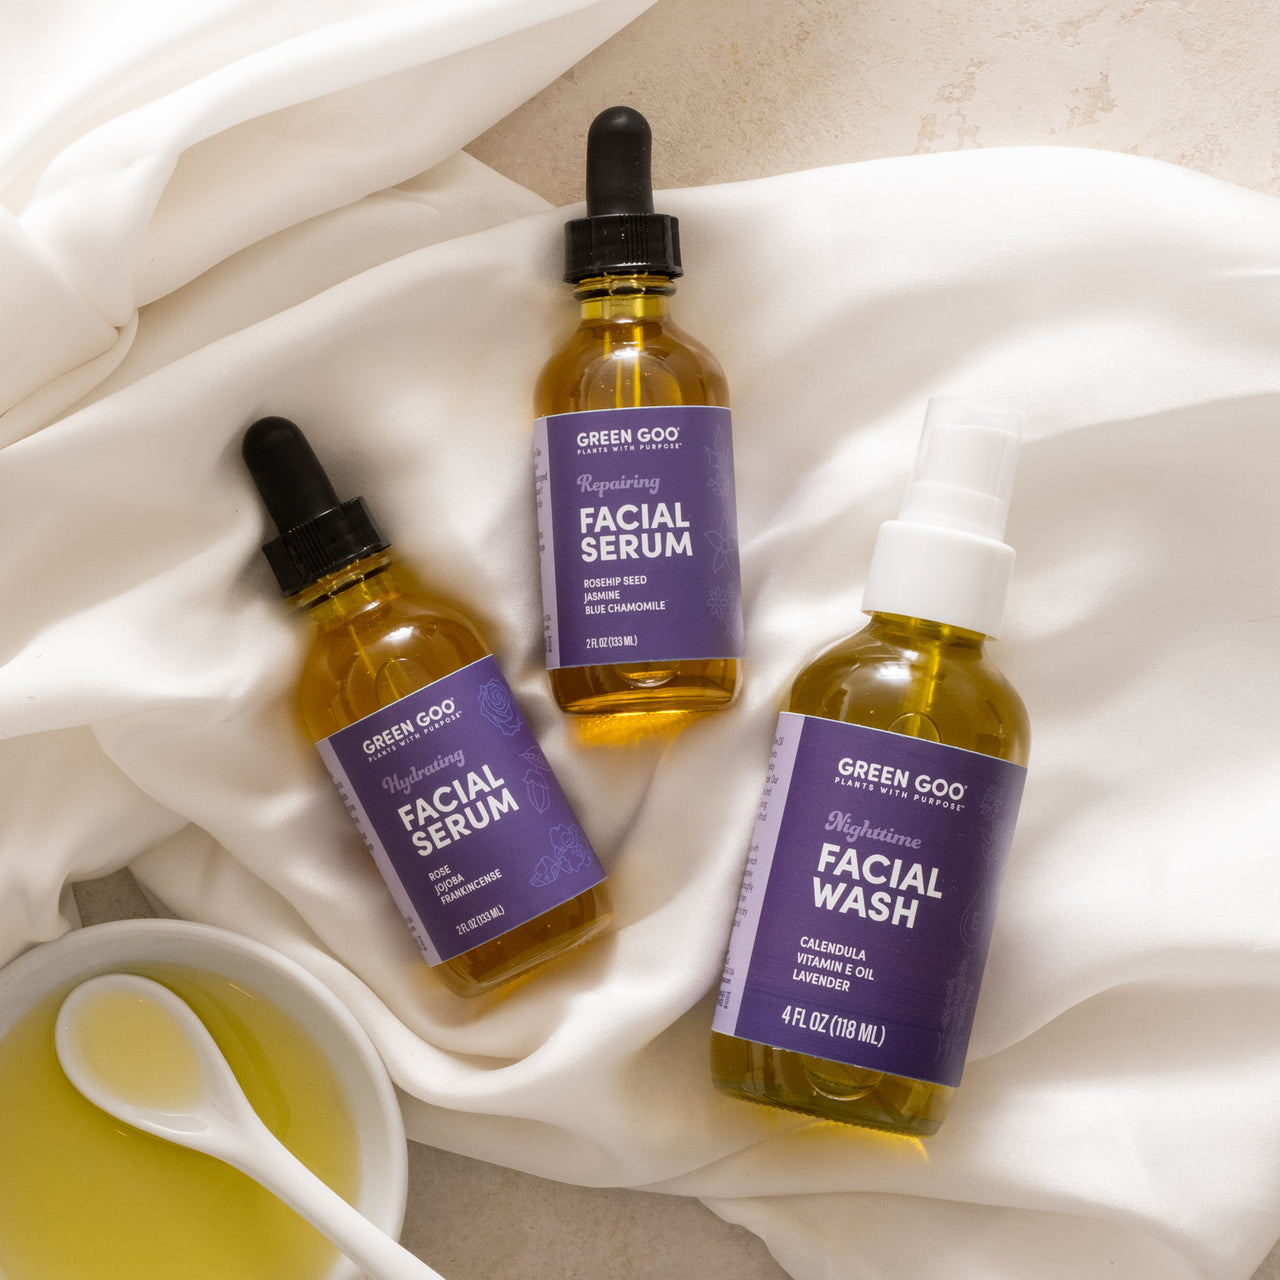 Green Goo's Sierra Sage Sleep Secrets Gift Set includes an oil-based facial wash and two facial serums--repairing and hydrating.